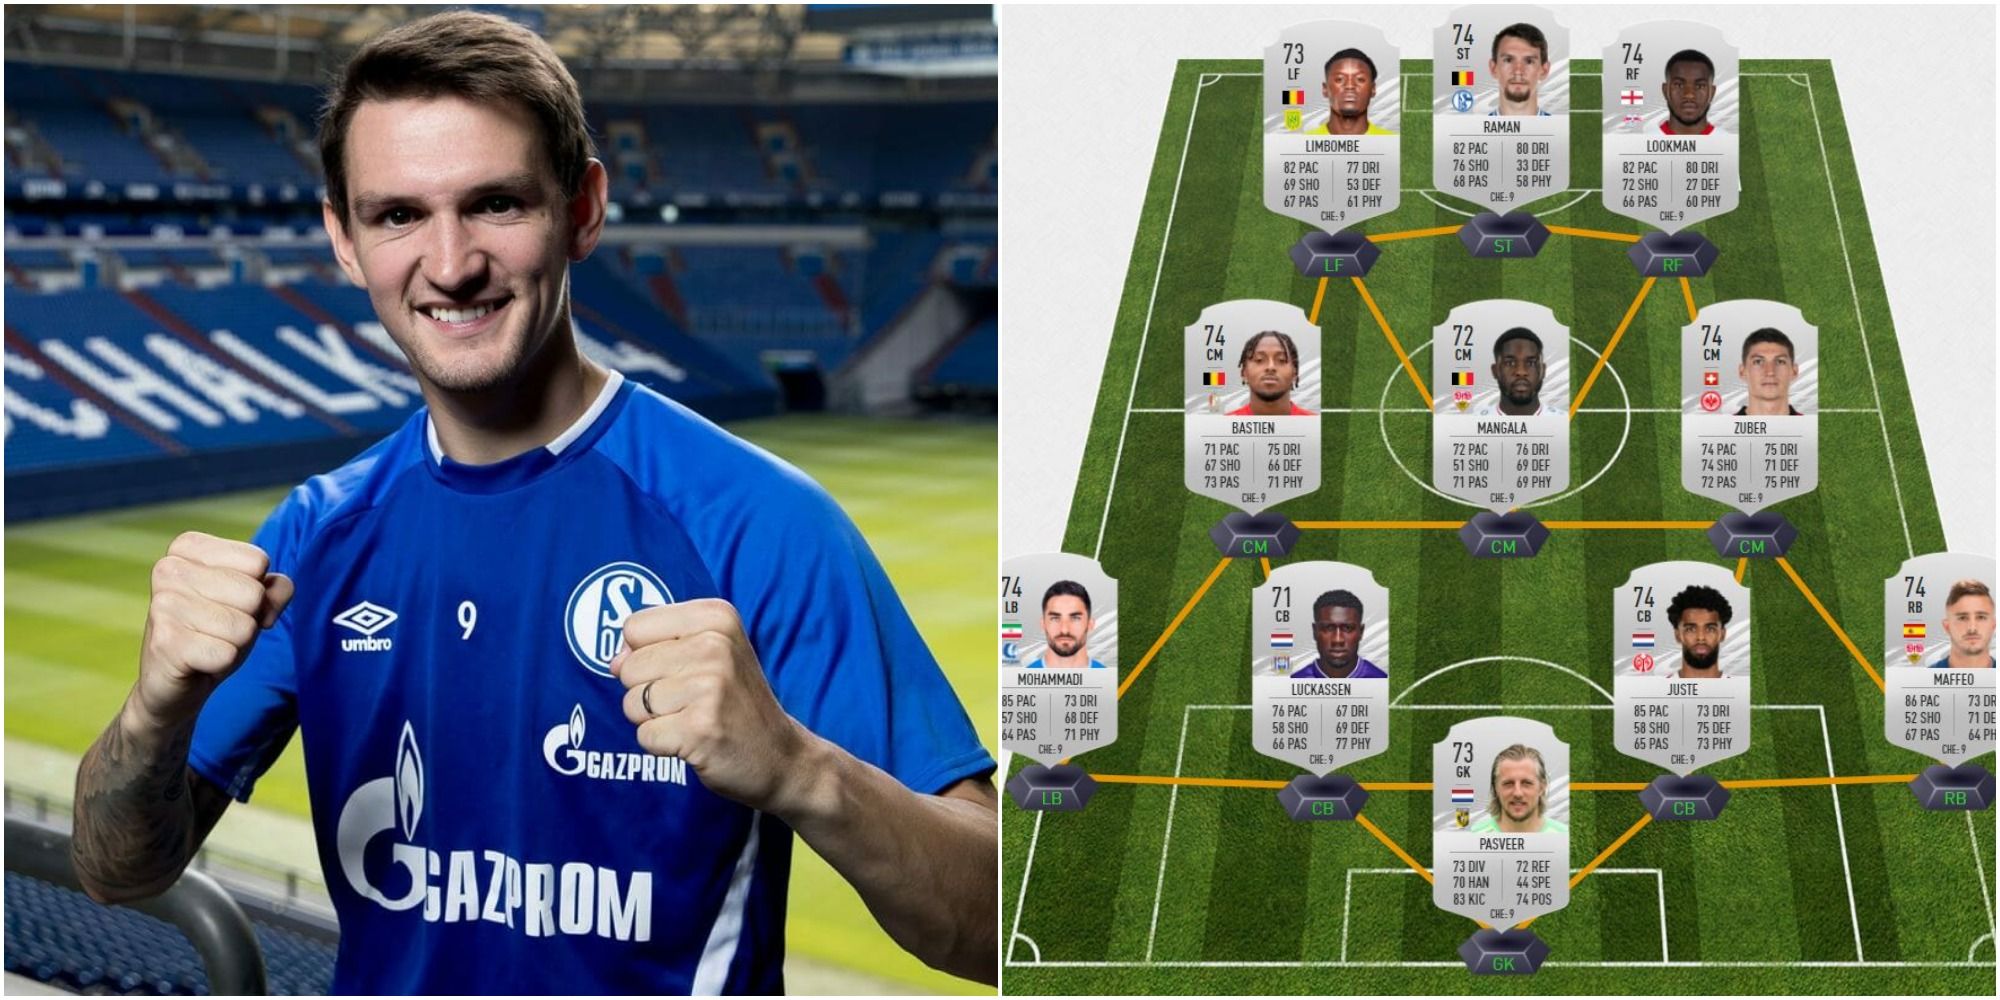 FIFA 21 Ultimate Team: Best Squad For Silver Challenges